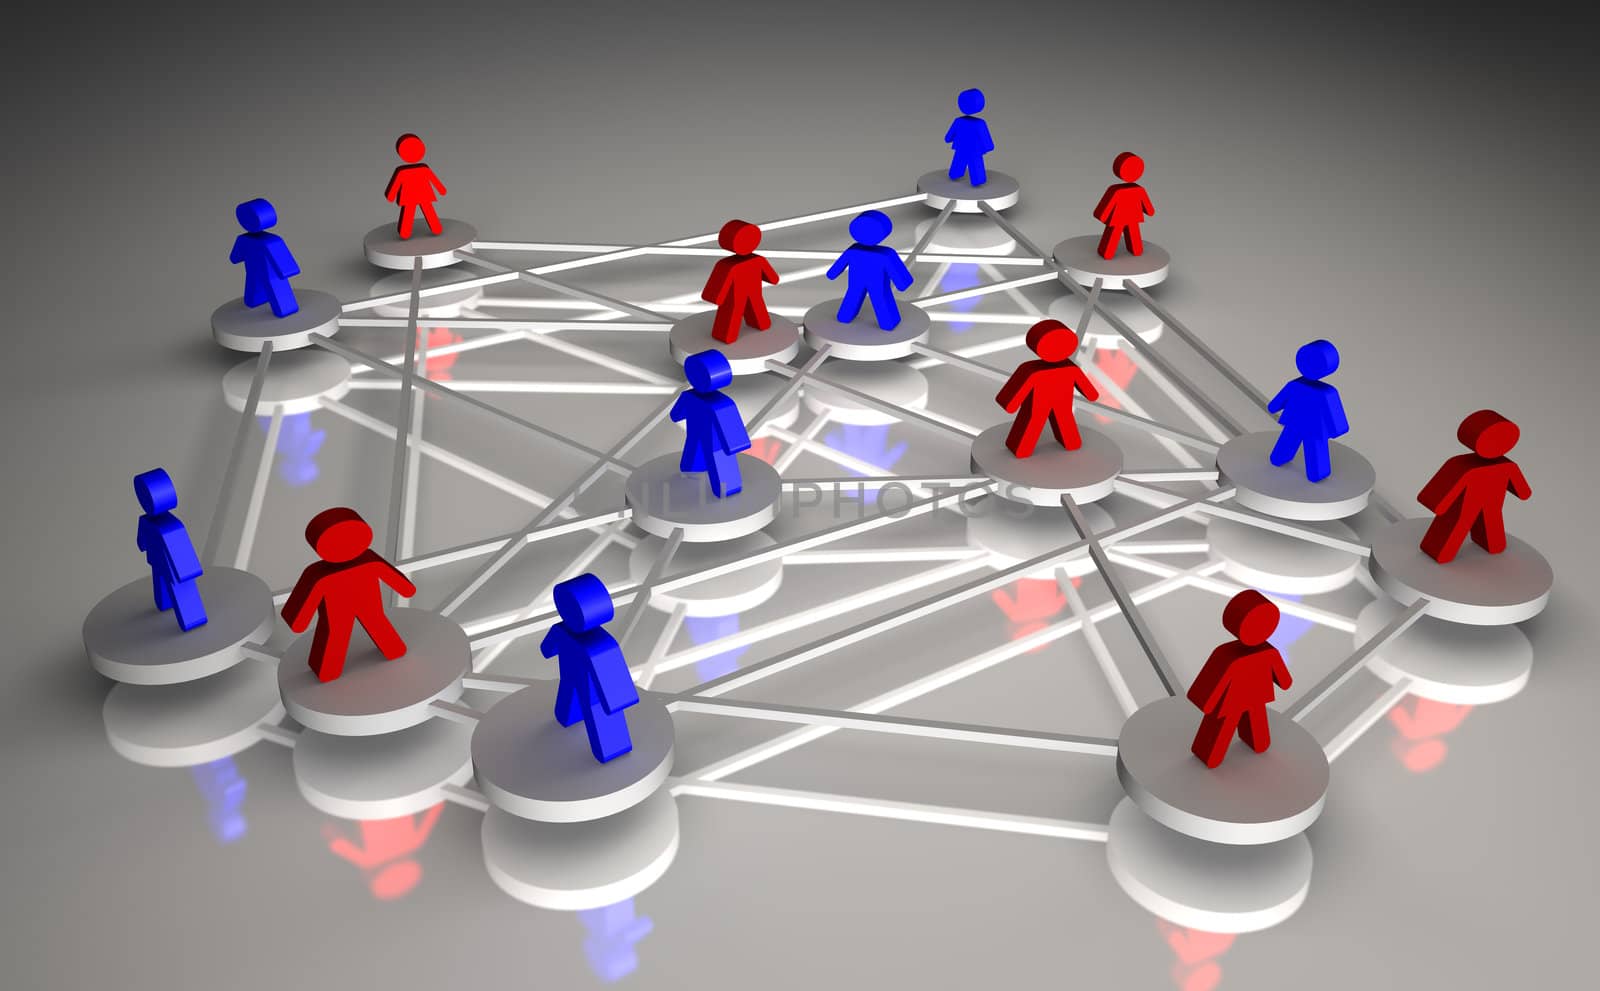 Illustration 3D rendered of the concept of people connected